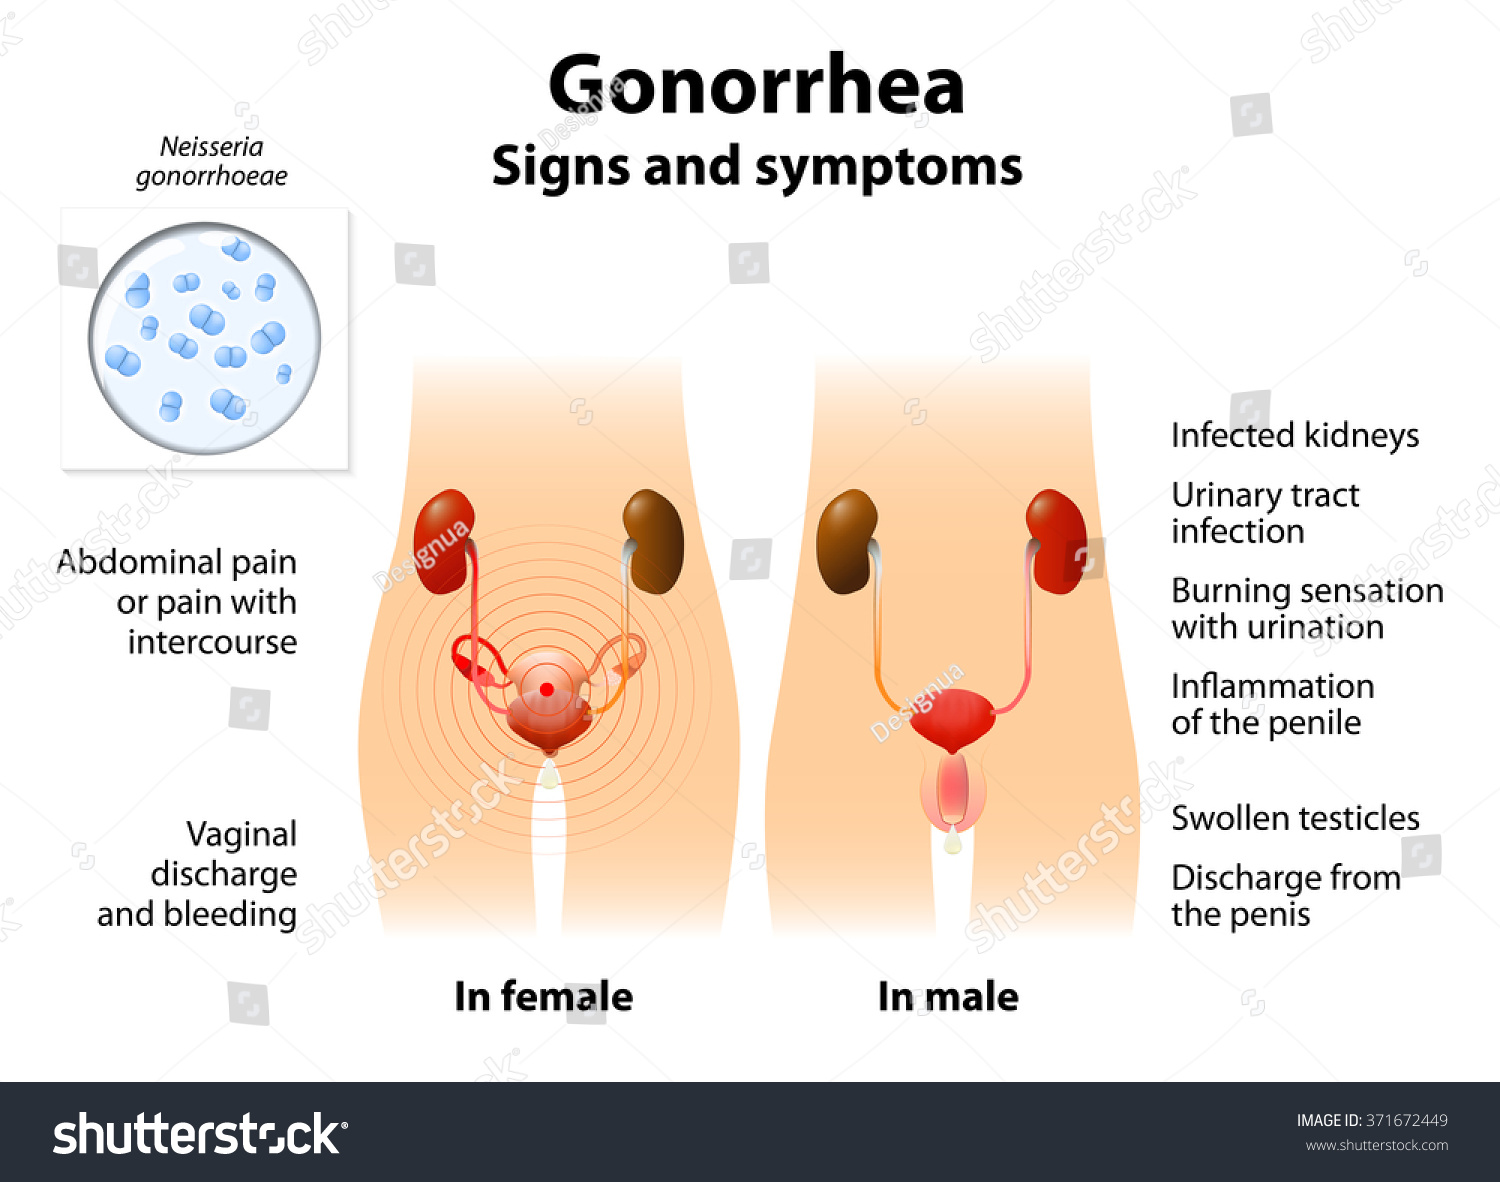 Gonorrhea Or Gonococcal Urethritis. Sexually Transmitted Infection That Is Caused By ...